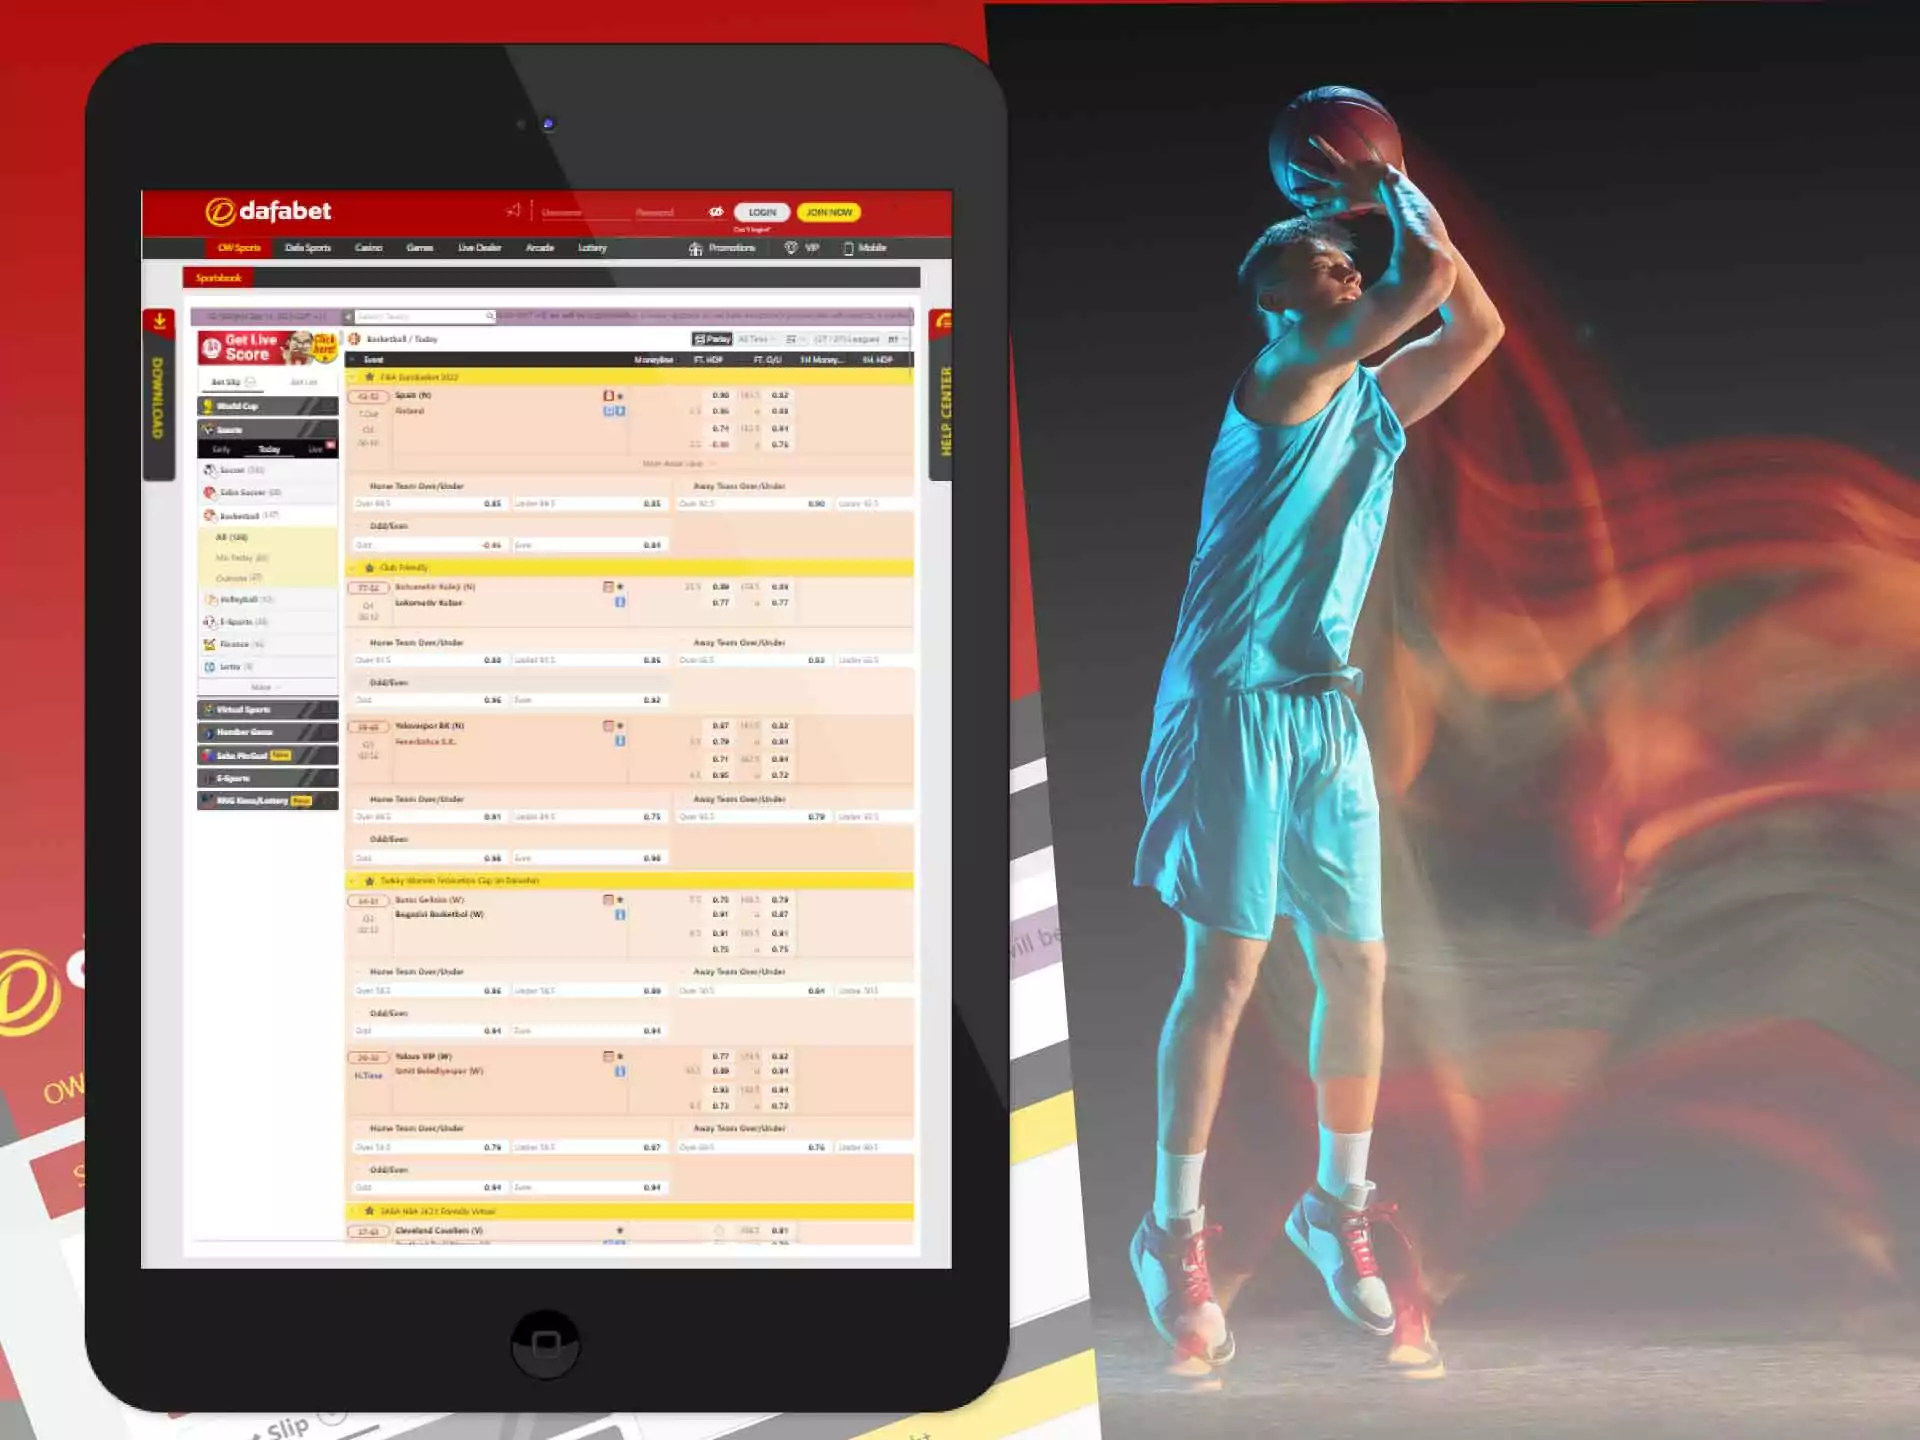 There is also basketball betting as an options in the Dafabet sportsbook.